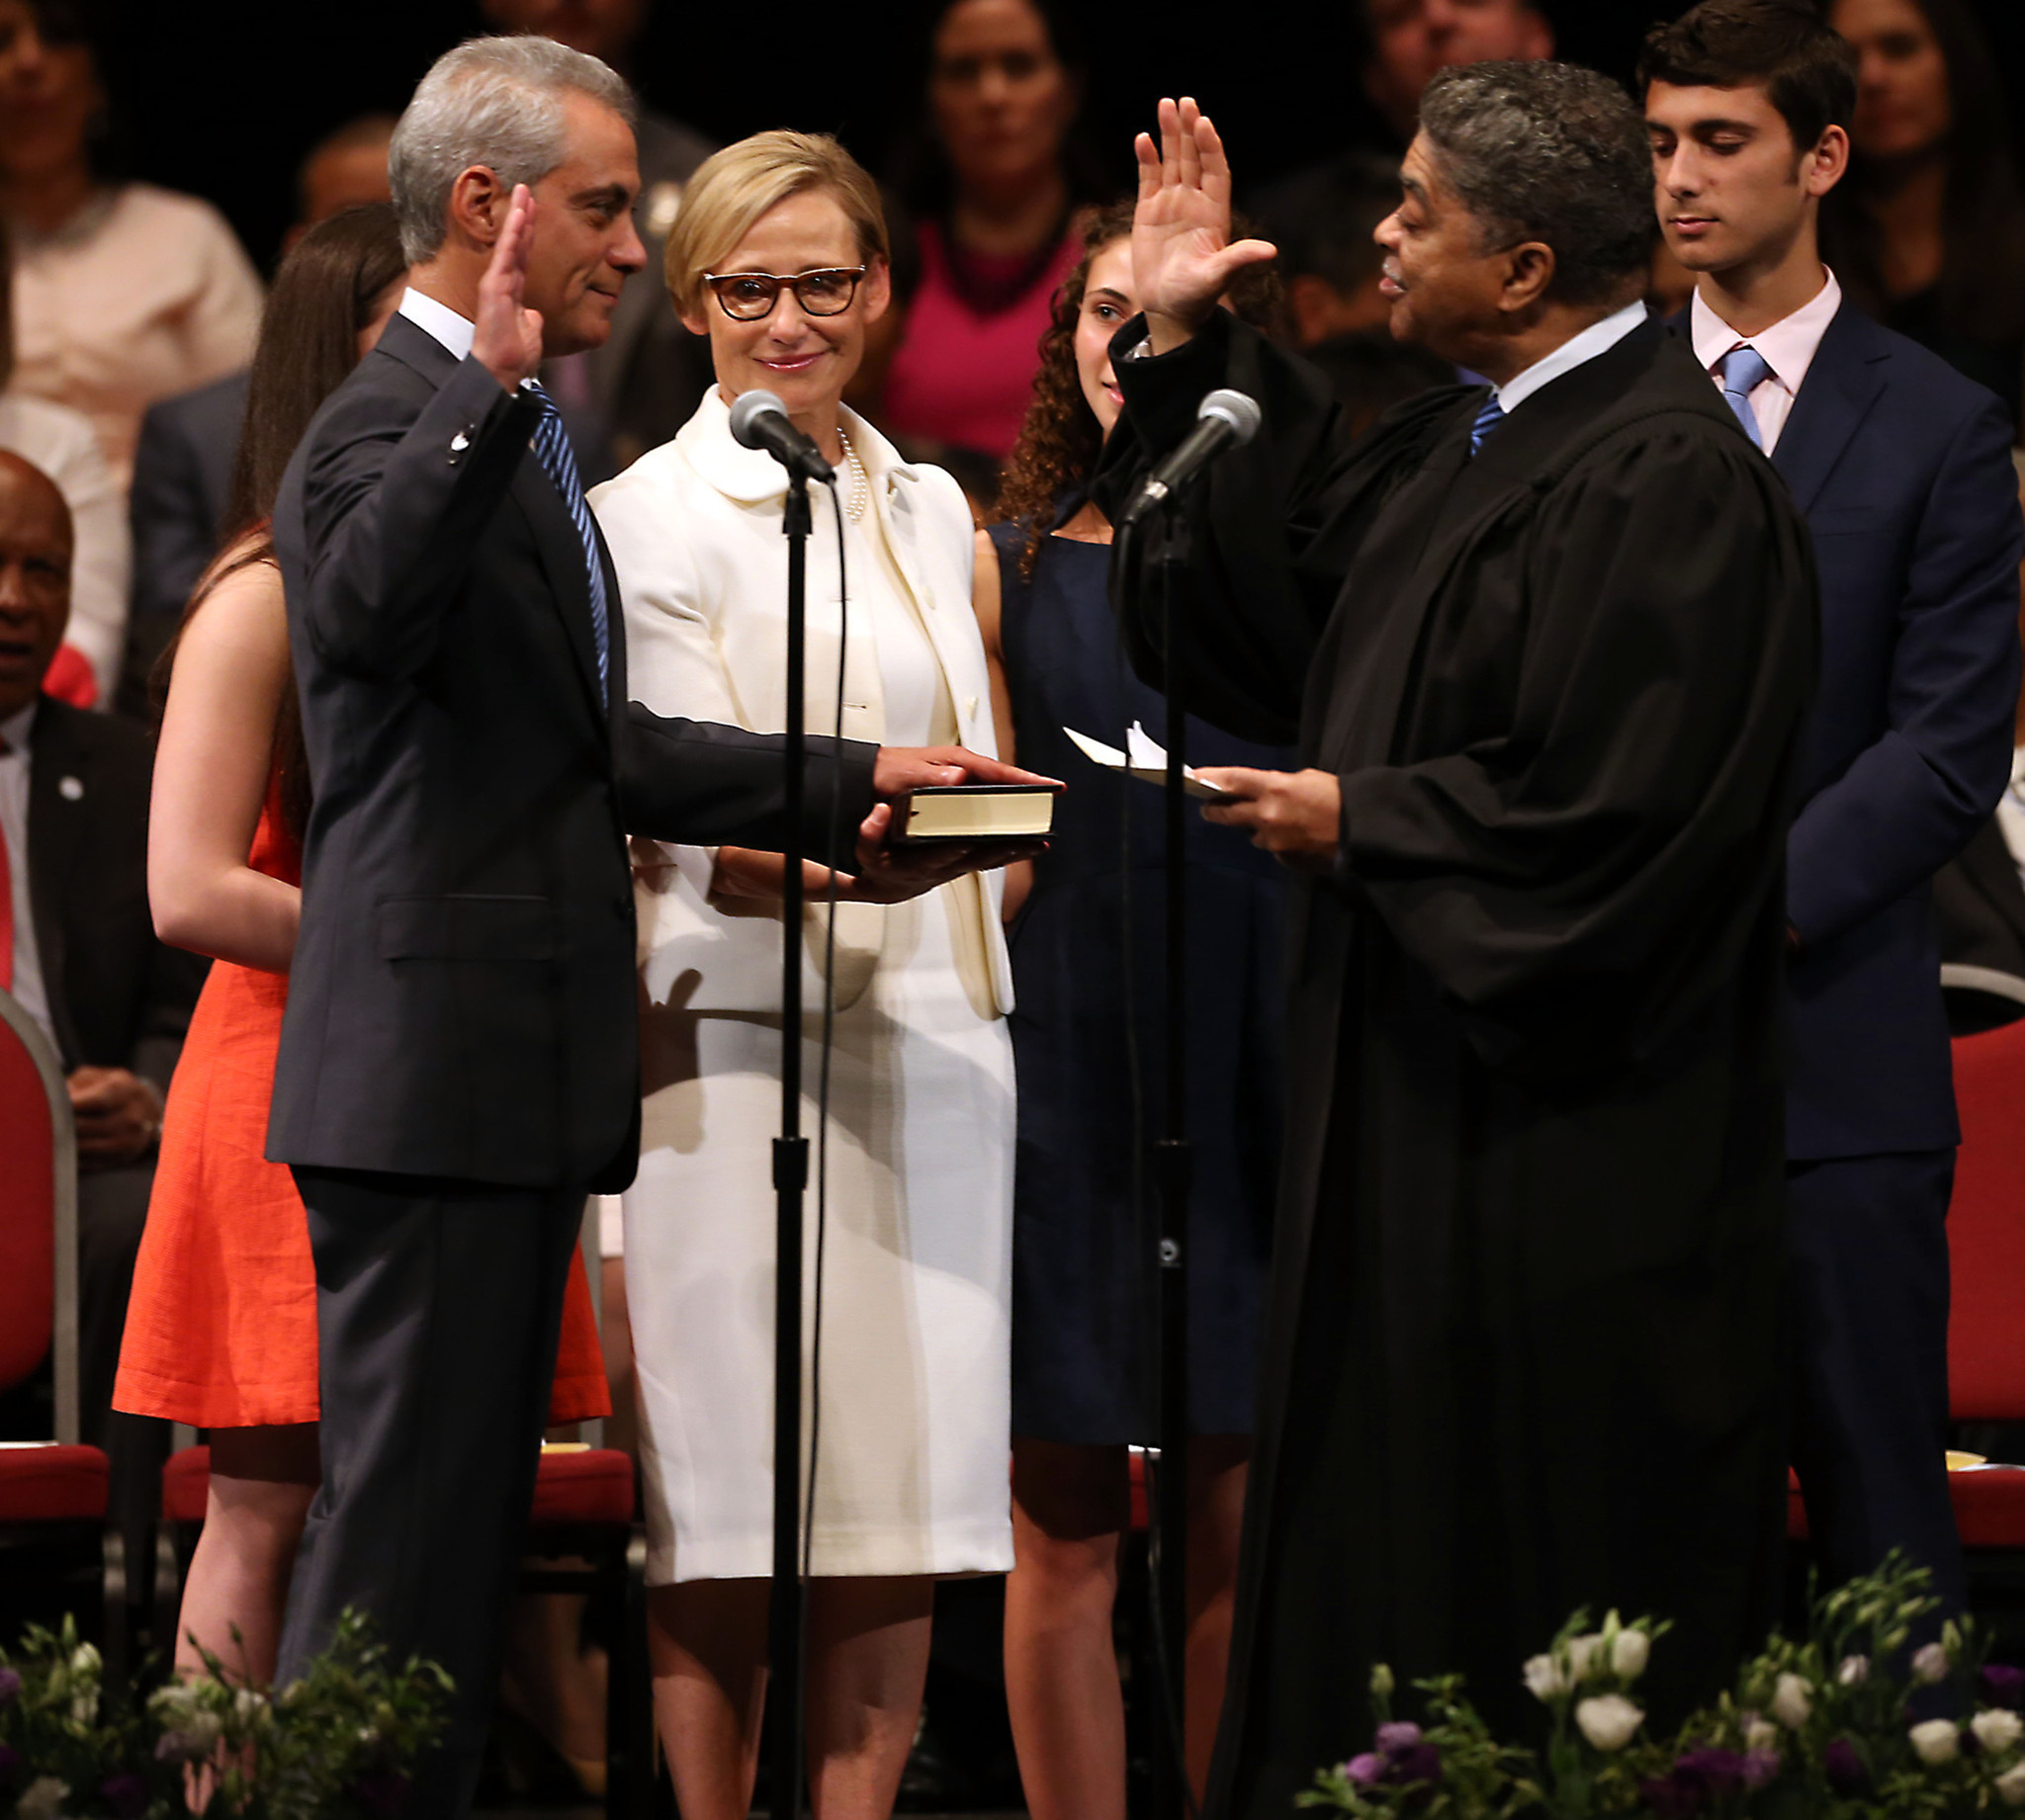 Mayor Rahm Emanuel under oath, his wife  and Judge Evans swearing  the mayor in second term.